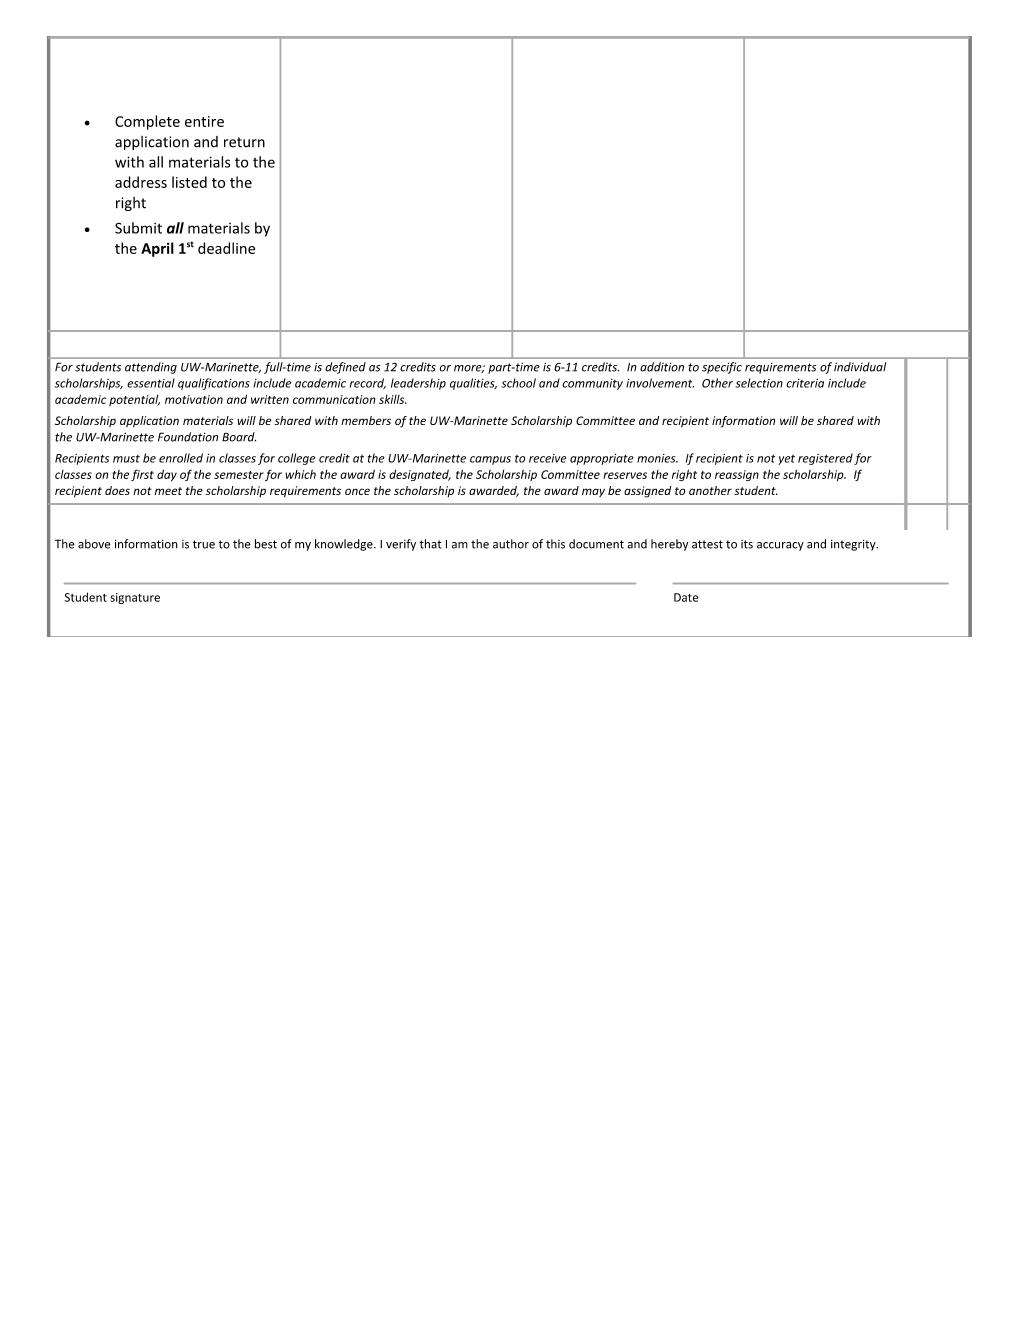 Checklist of Information Required for Complete Application